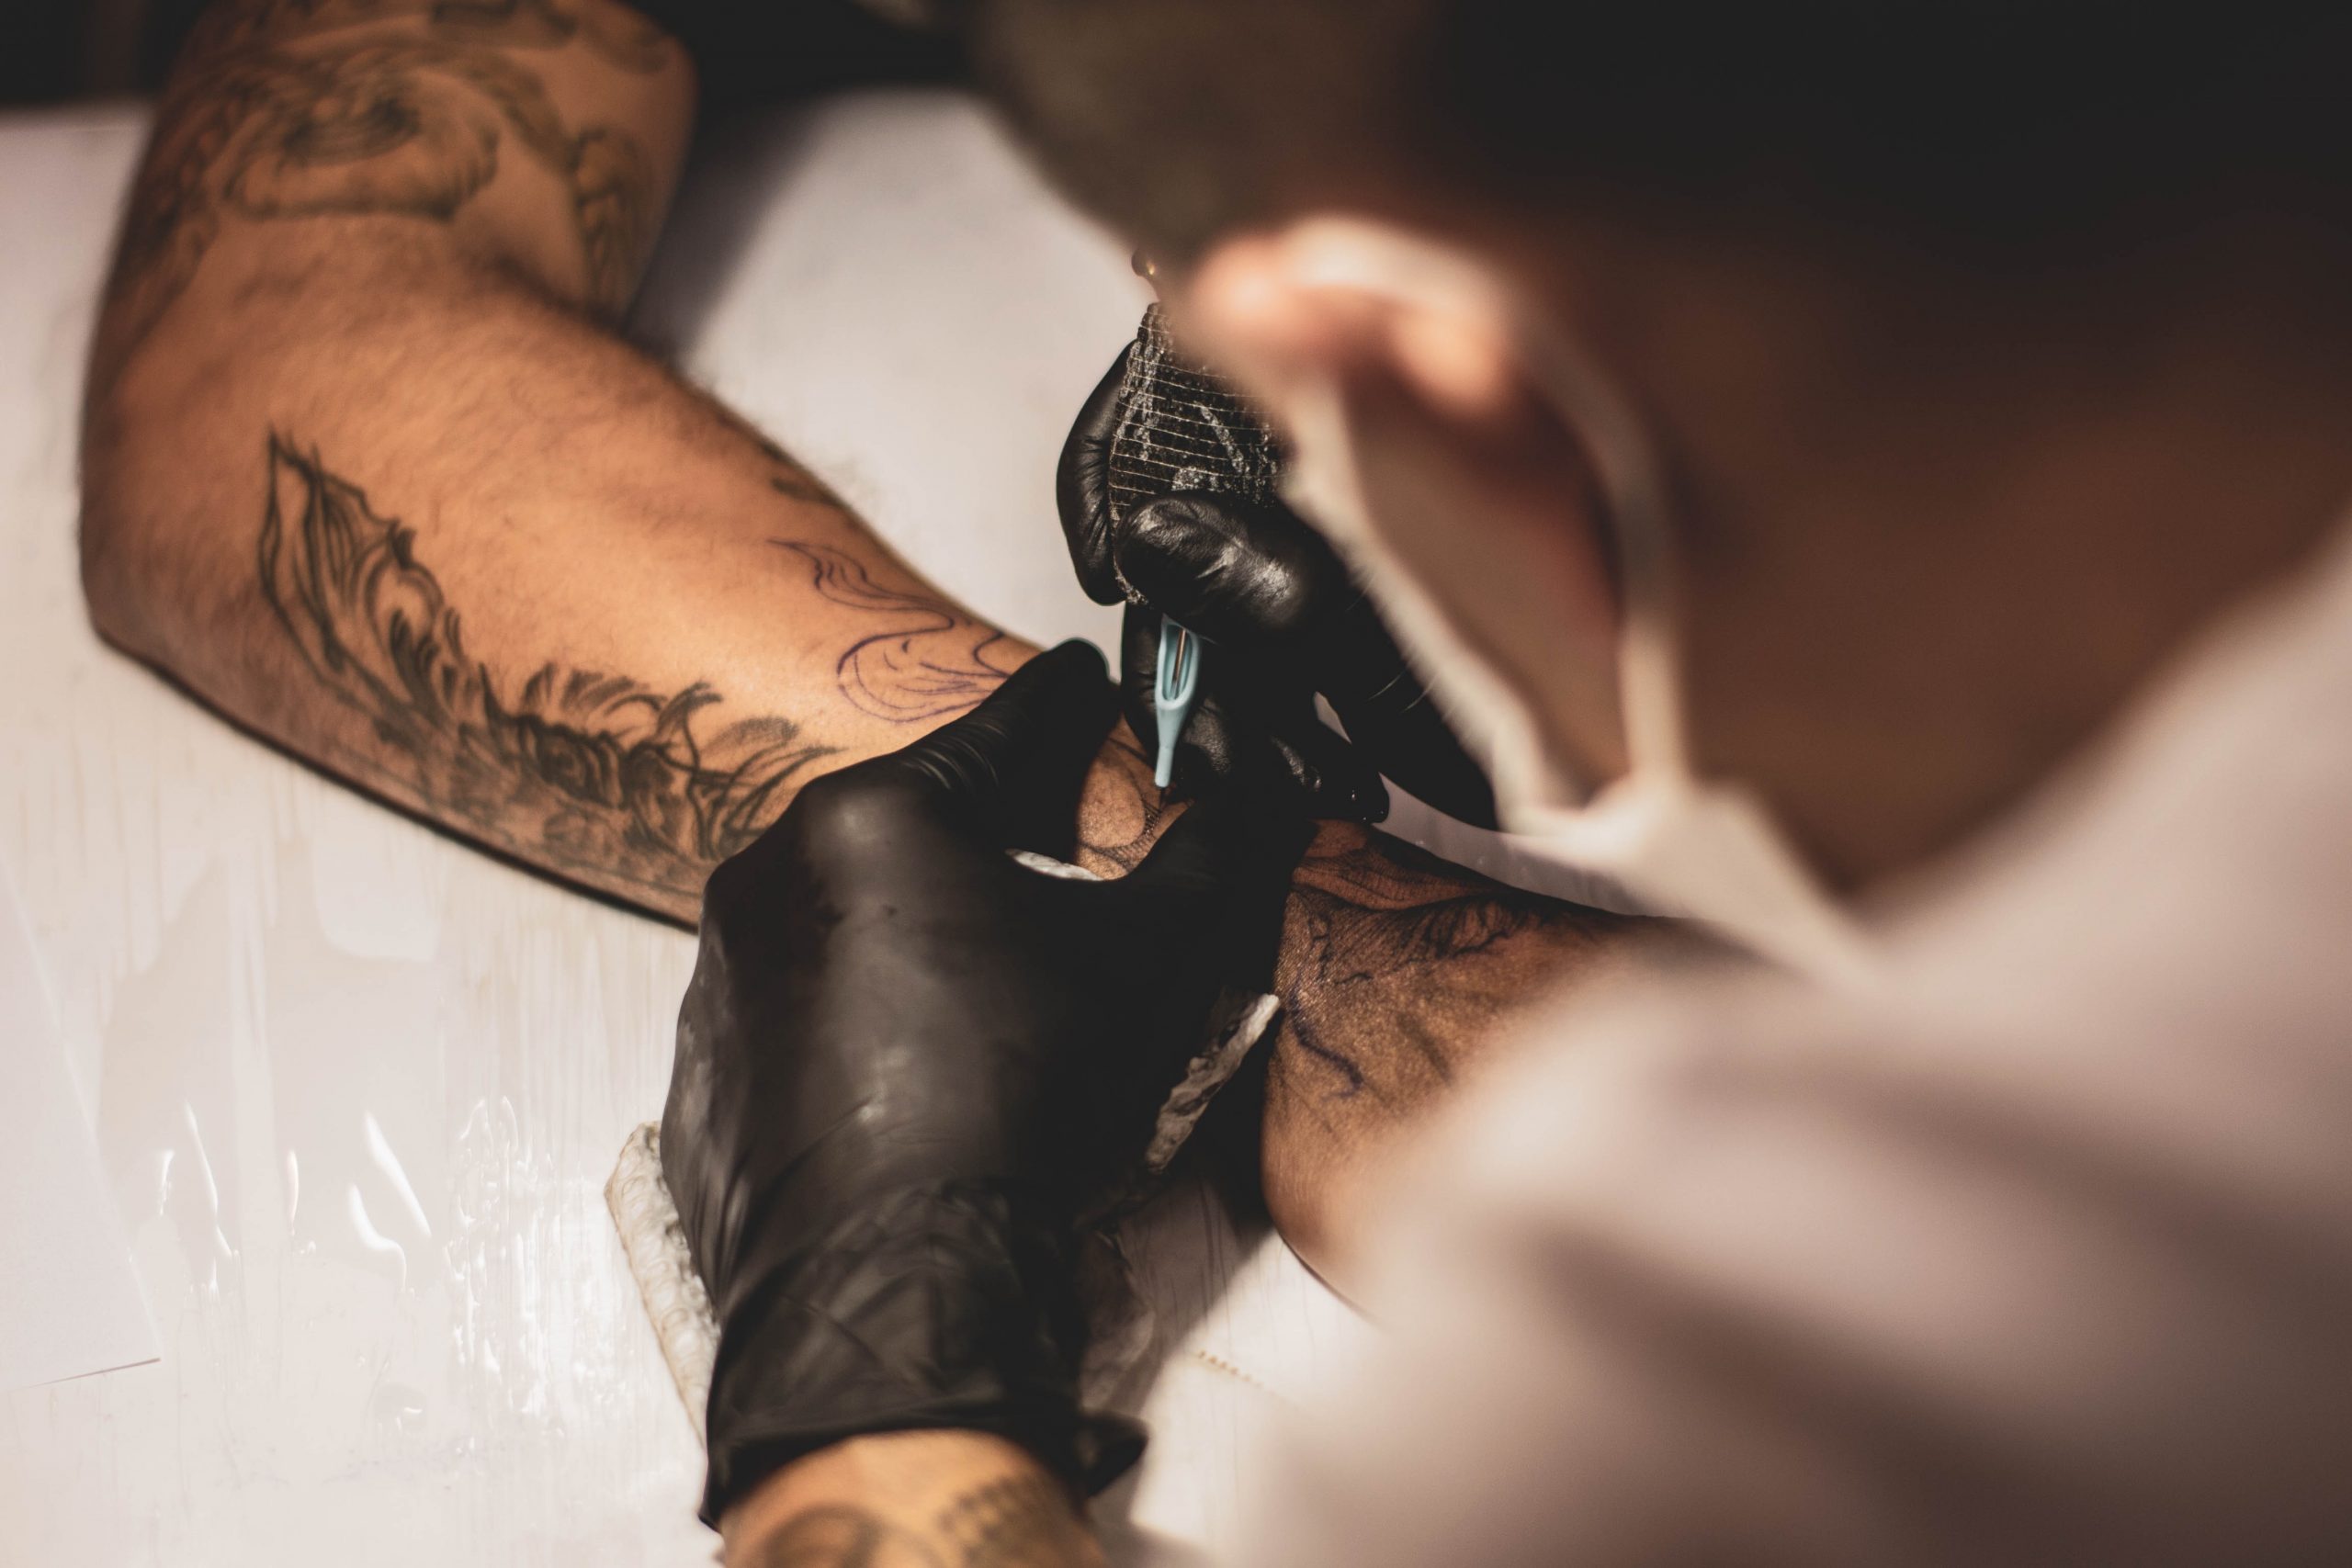 Can All Tattoos Be Removed? 6 Things You Should Know - Dr Nathan Holt